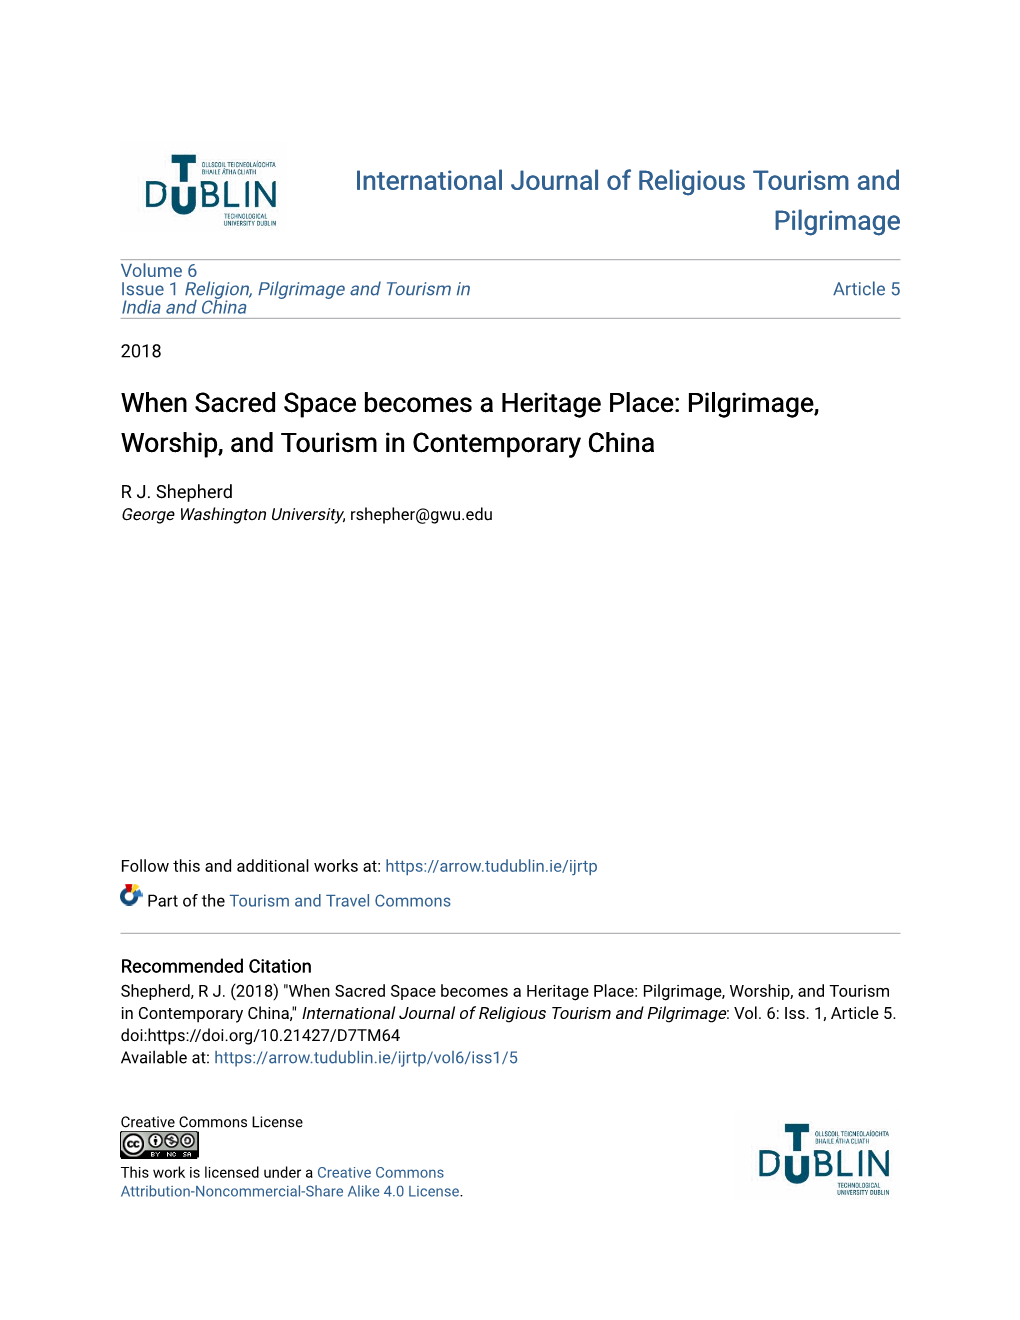 Pilgrimage, Worship, and Tourism in Contemporary China